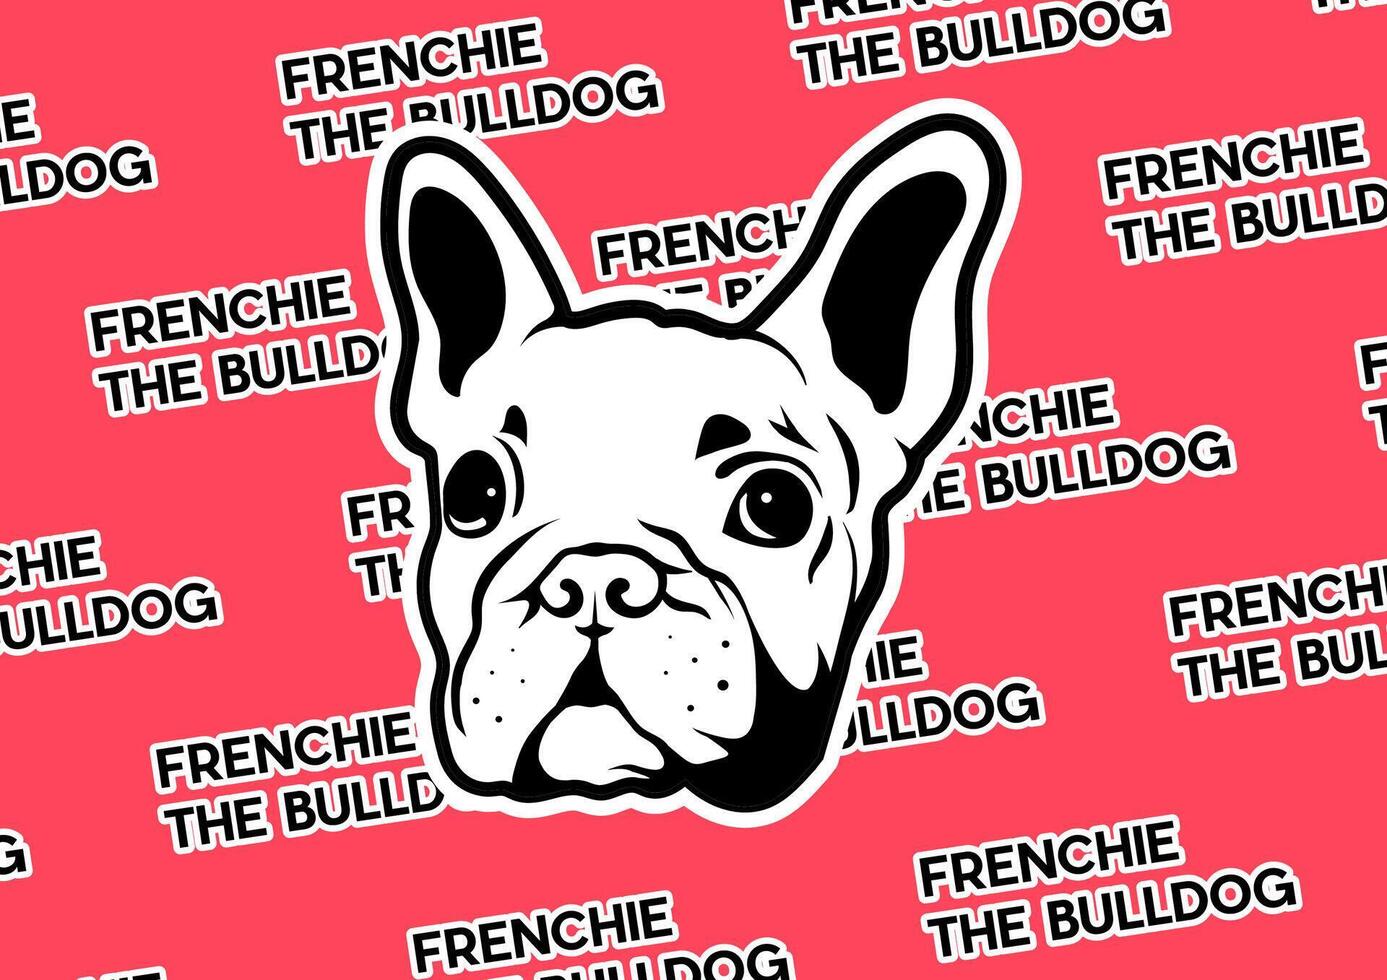 Cool Frenchie The Bulldog poster vector